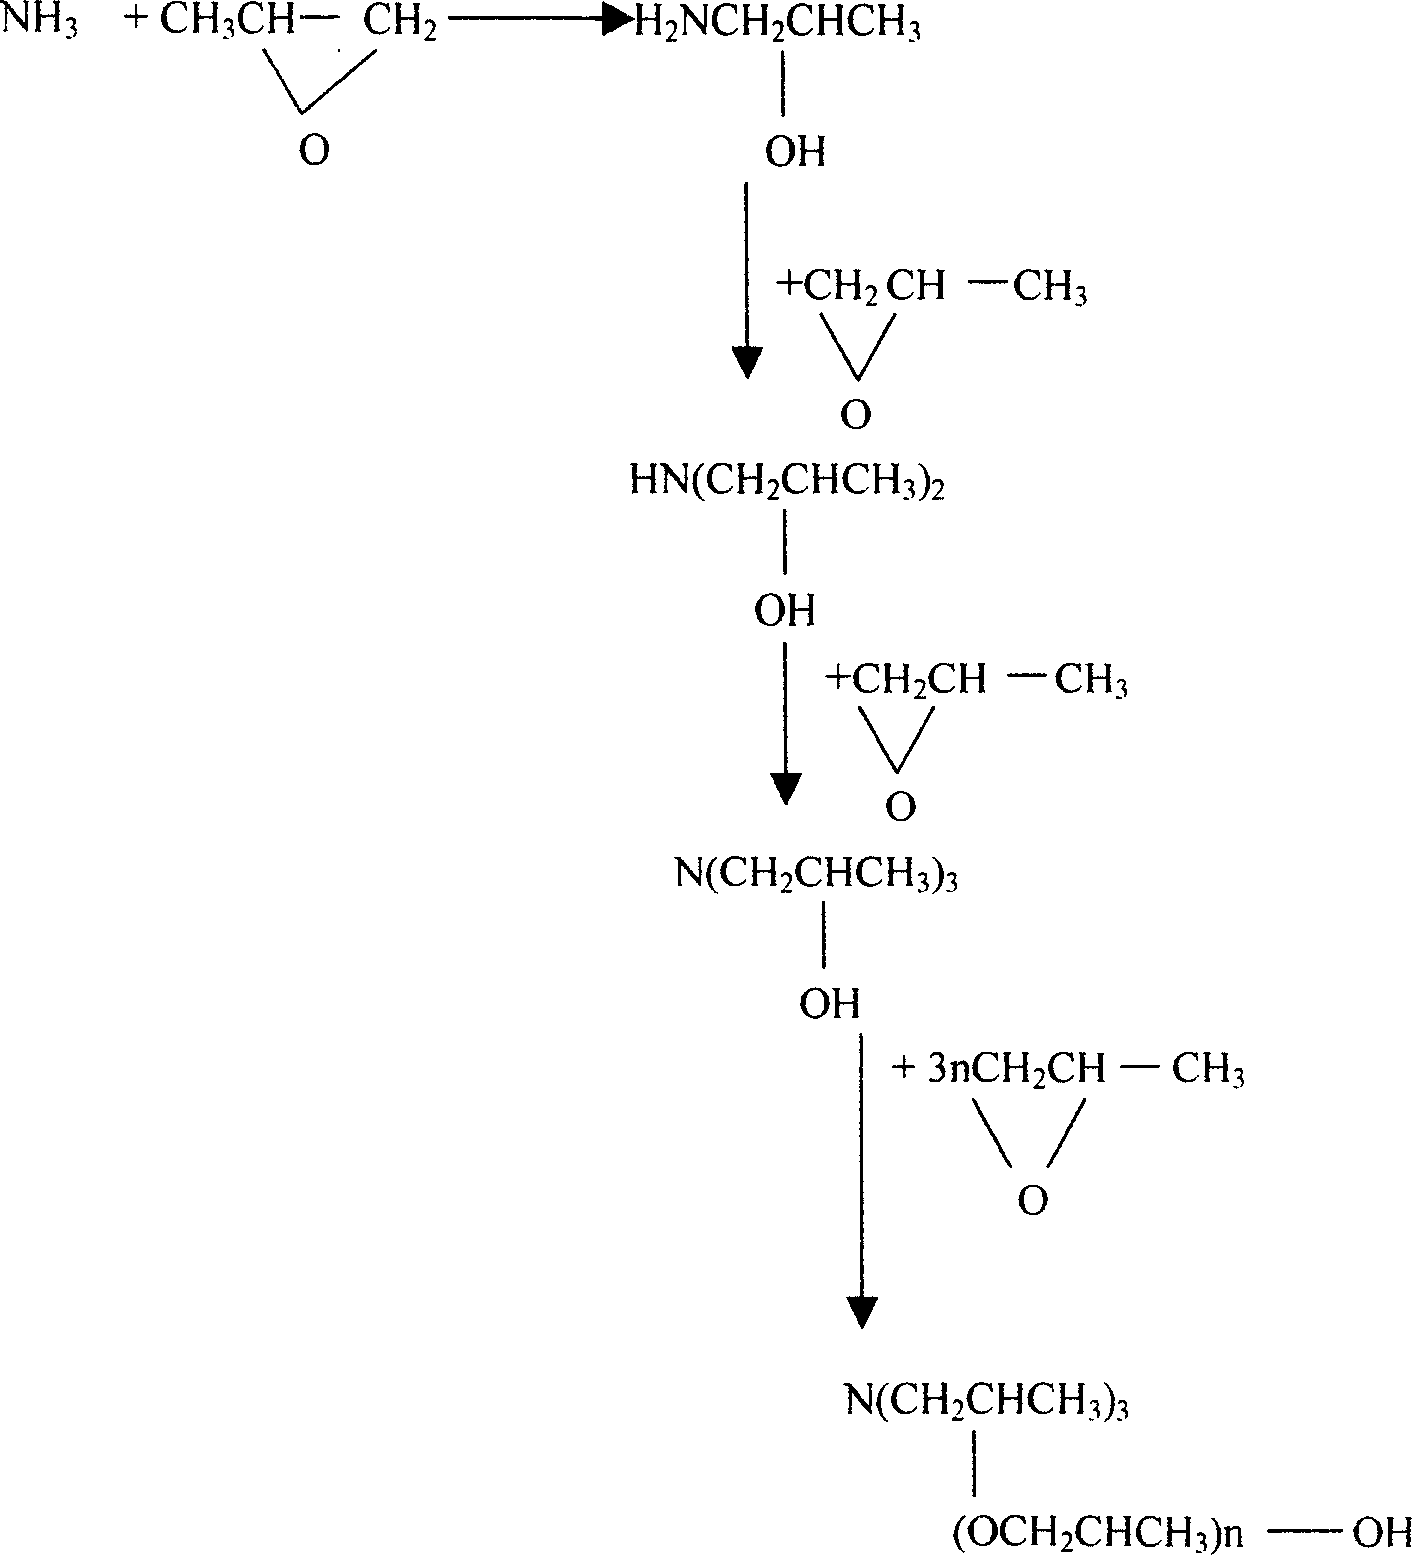 Process for synthesis of triisopropanolamine